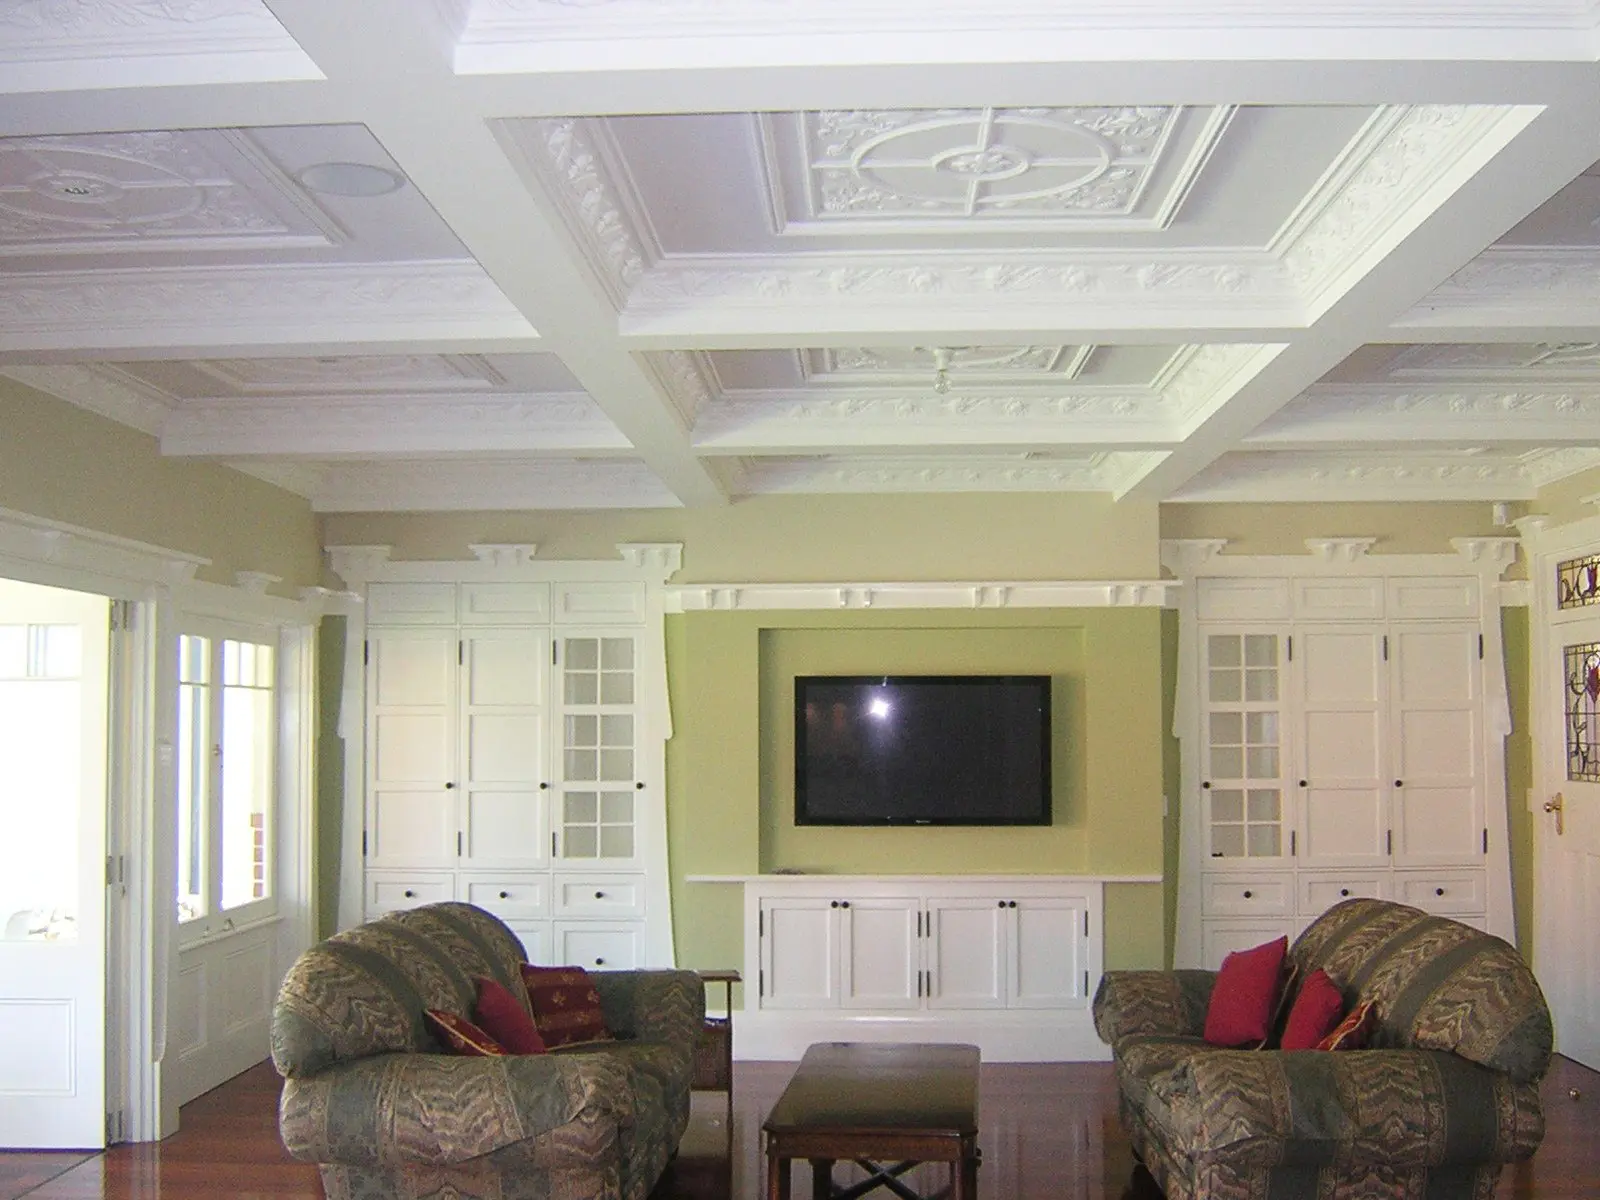 Panels SC163 used in a boxed style ceiling with cornice SC54A